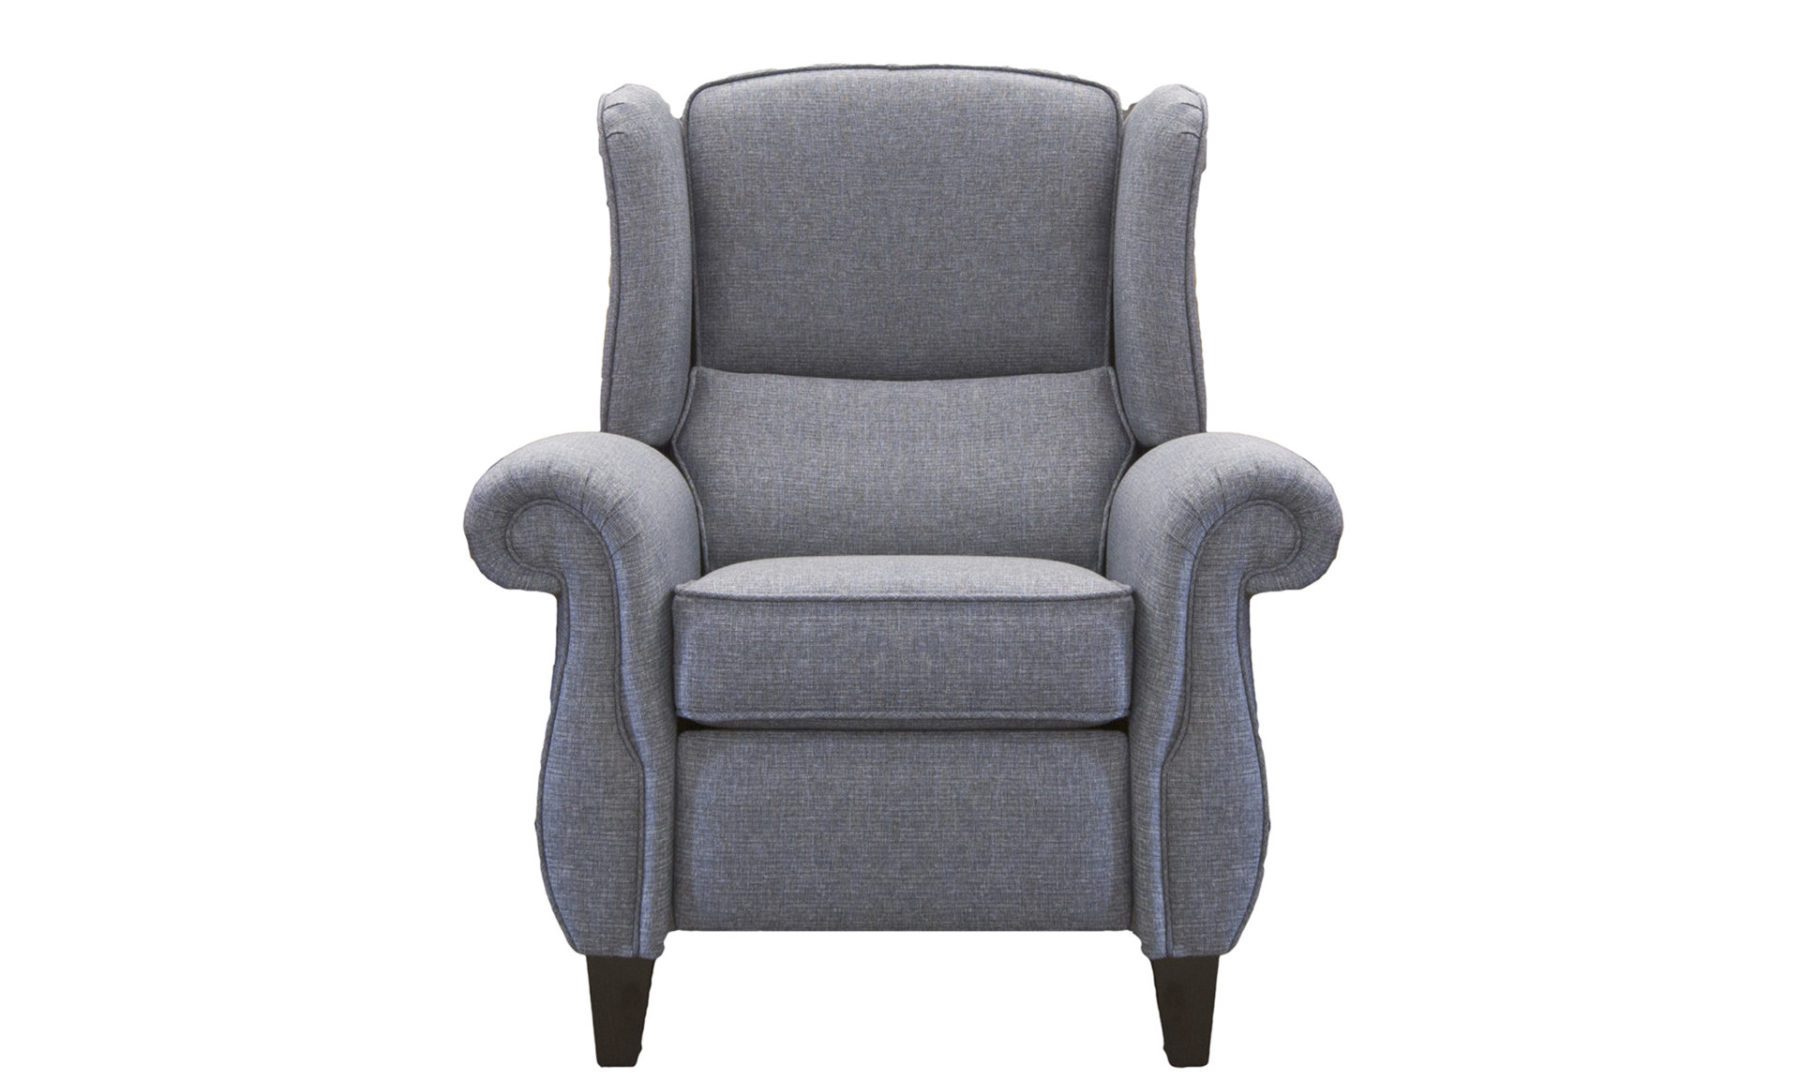 Greville Recliner Chair in Ado Marine, Bronze Collection Fabric